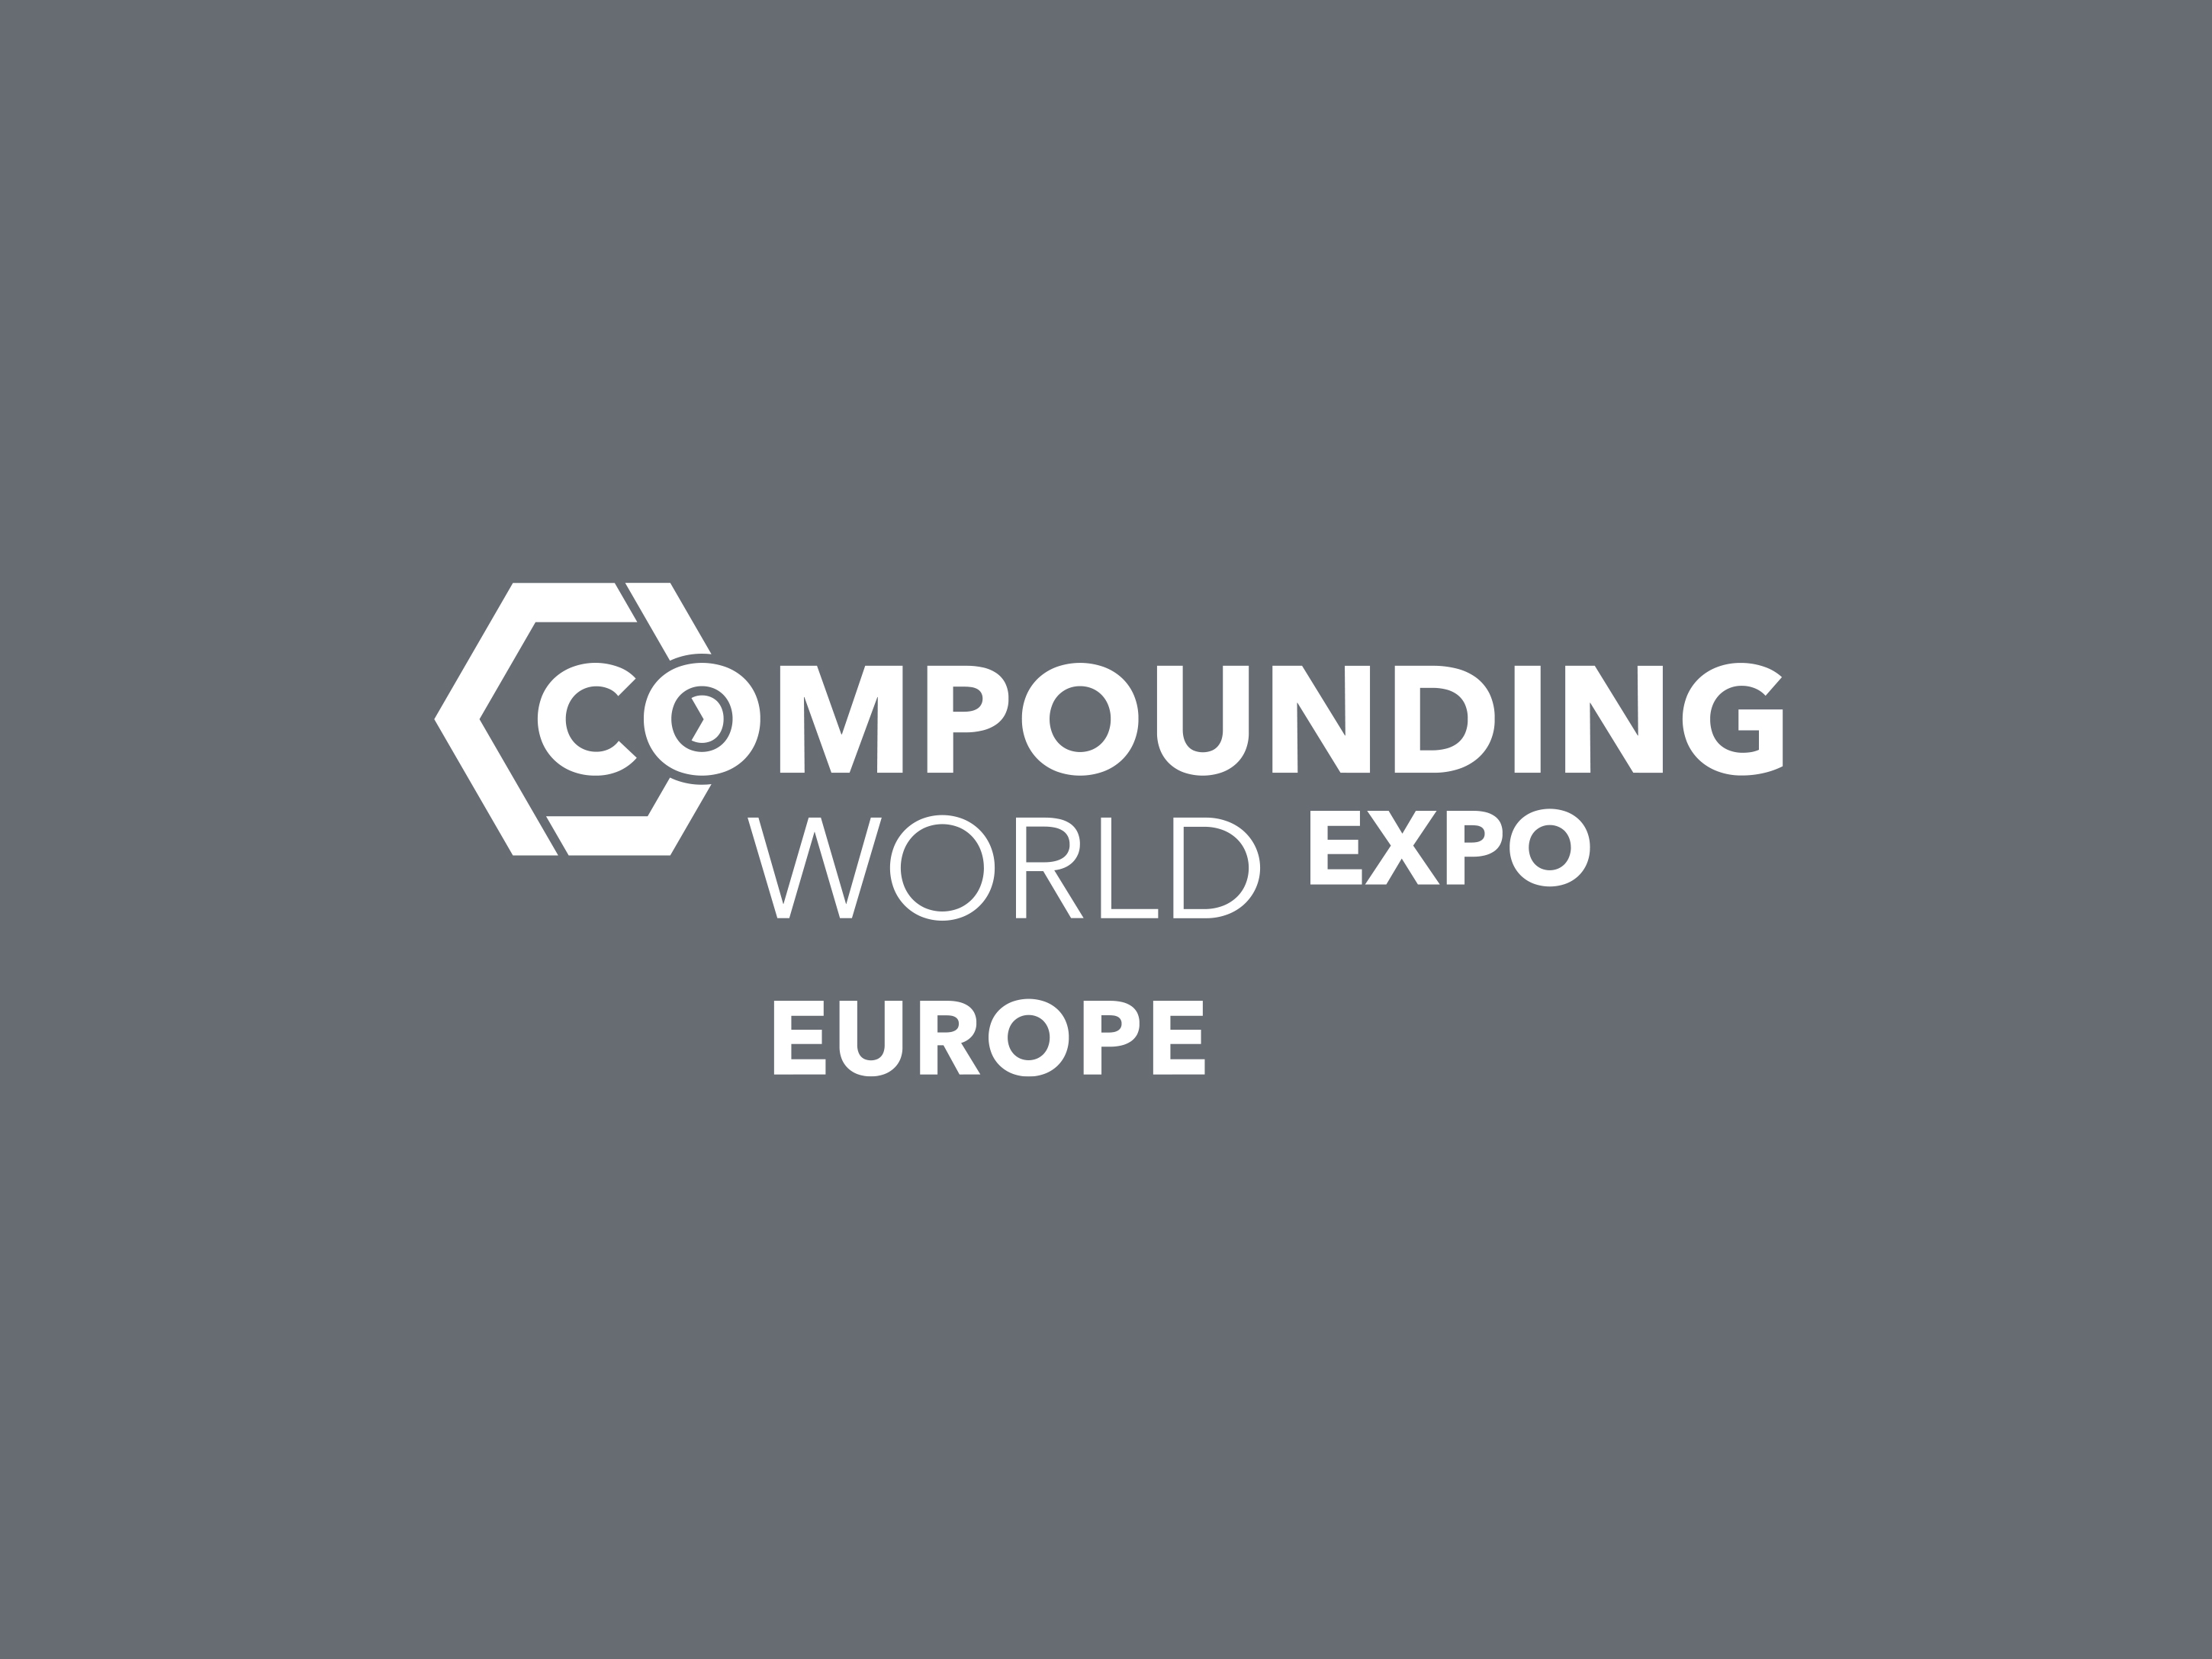 Logo of the Compounding World Expo Europe, the international exhibition for plastics additives and compounding